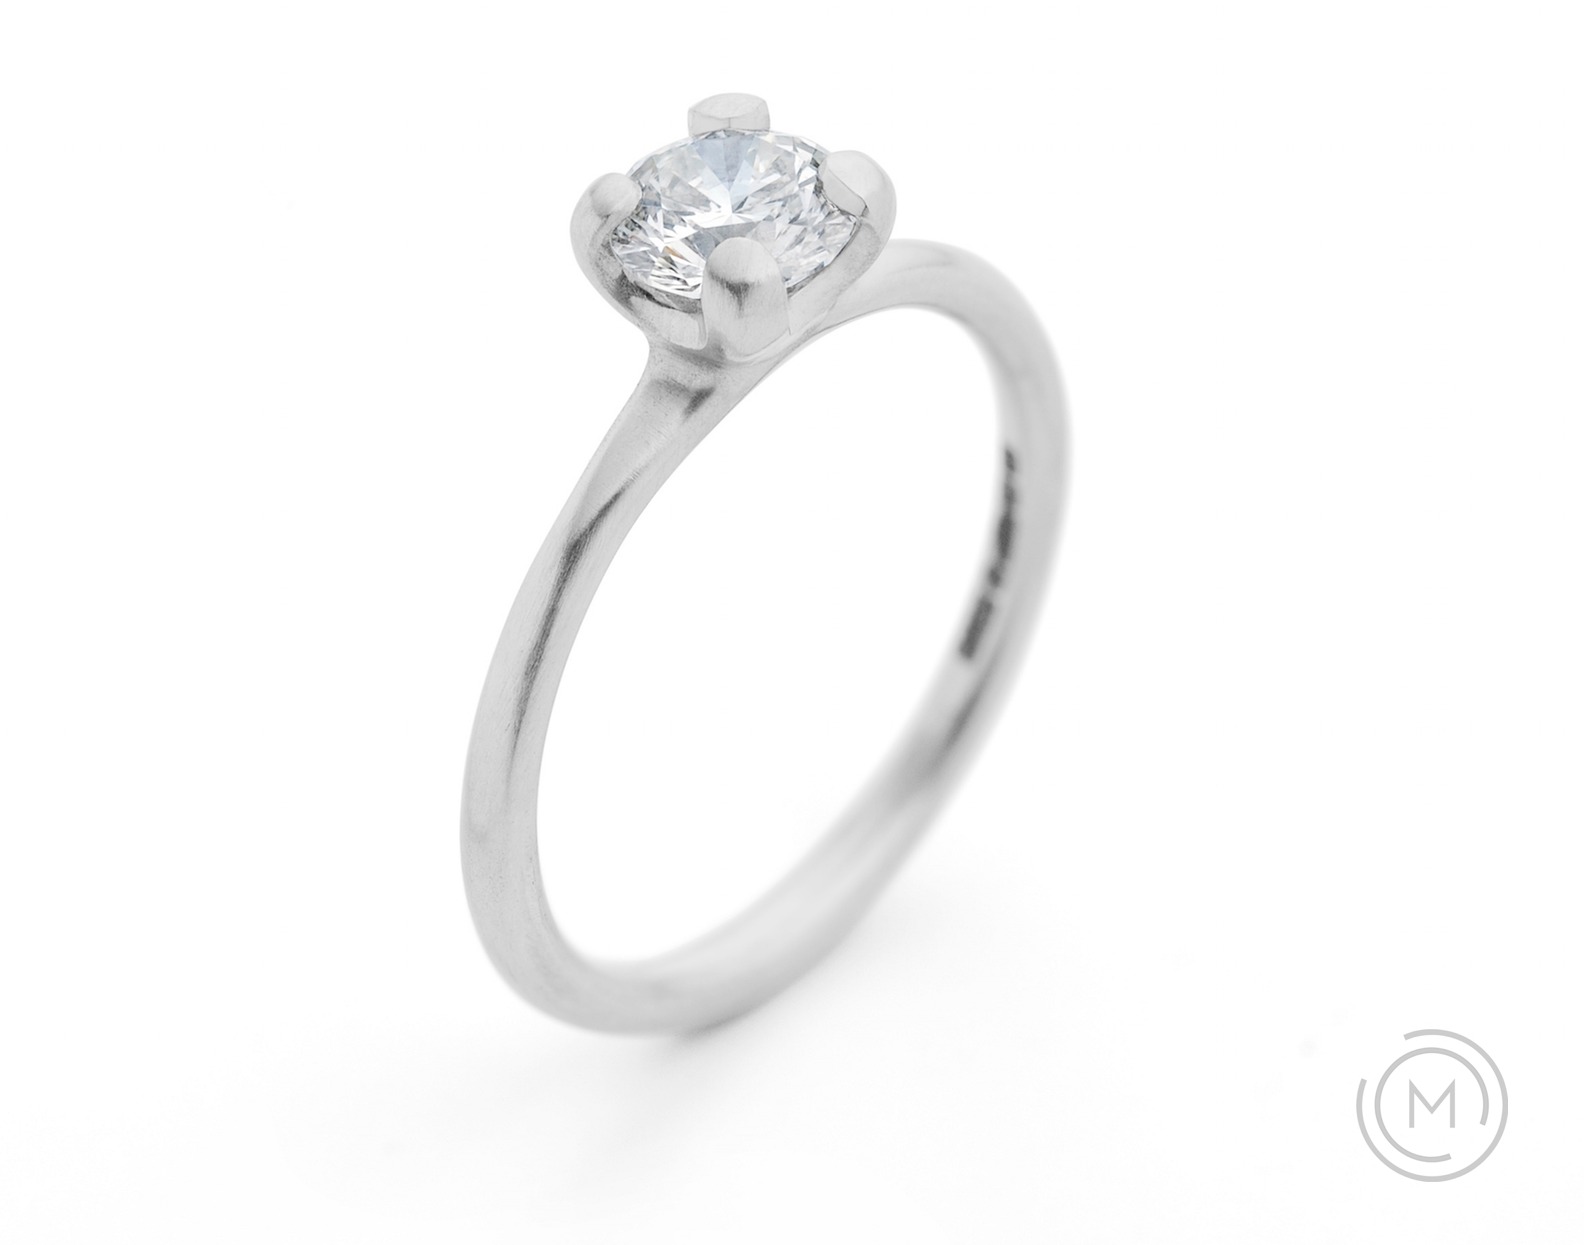 Contemporary white diamond solitaire engagement ring